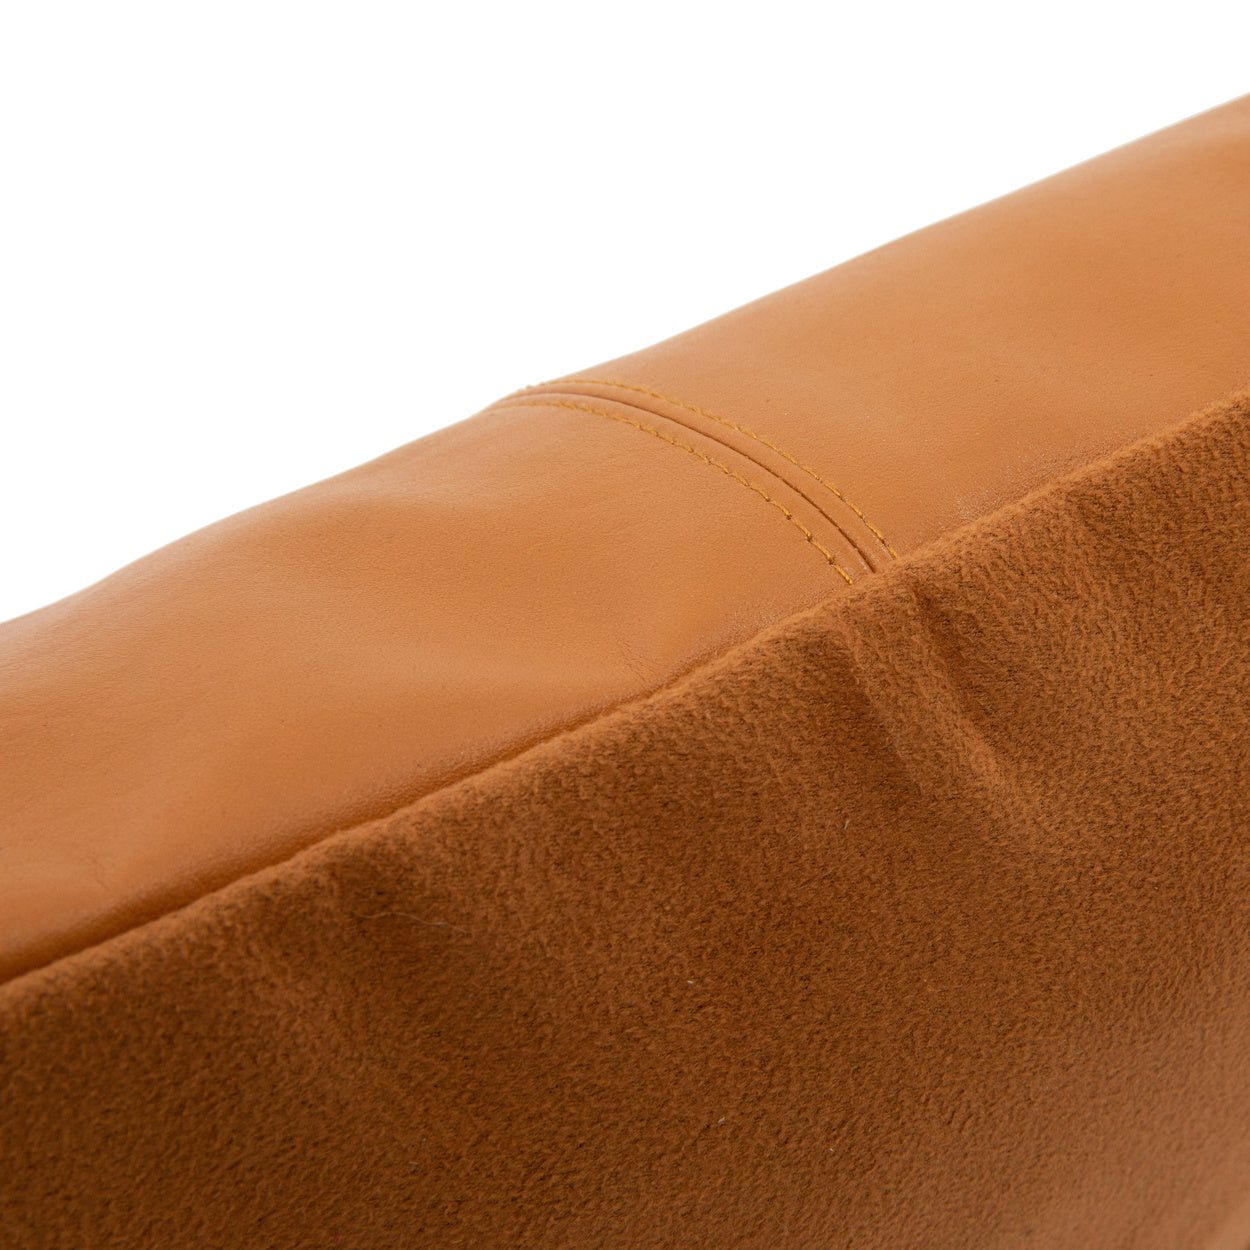 THE FOUR PANEL Leather Cushion Cover Camel macro top view